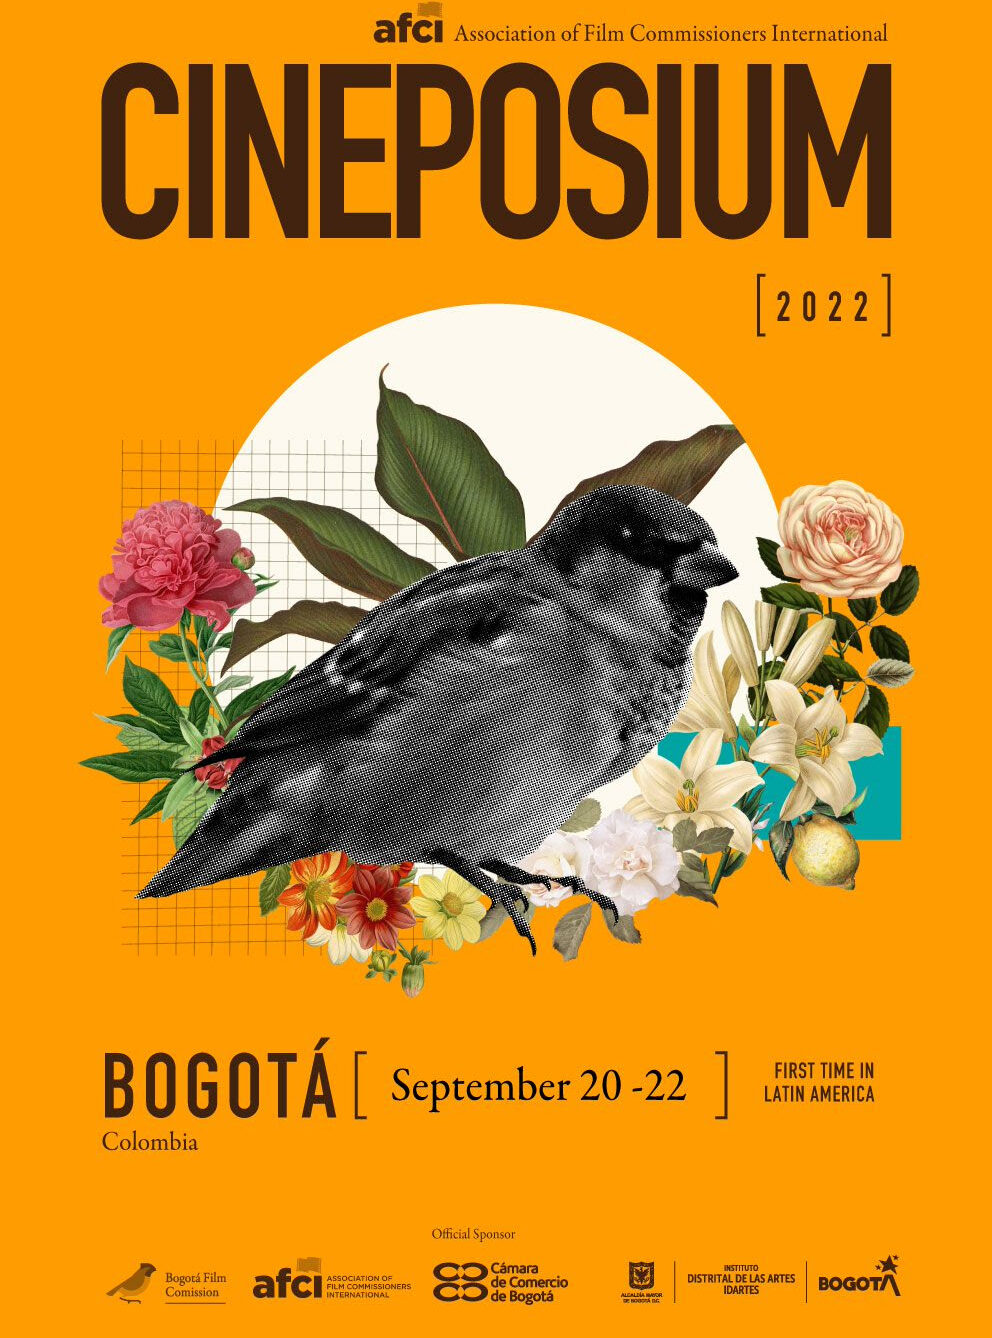 Ana Piñeres is one of the guests of the Cineposium event that is taking place for the first time in Bogotá.